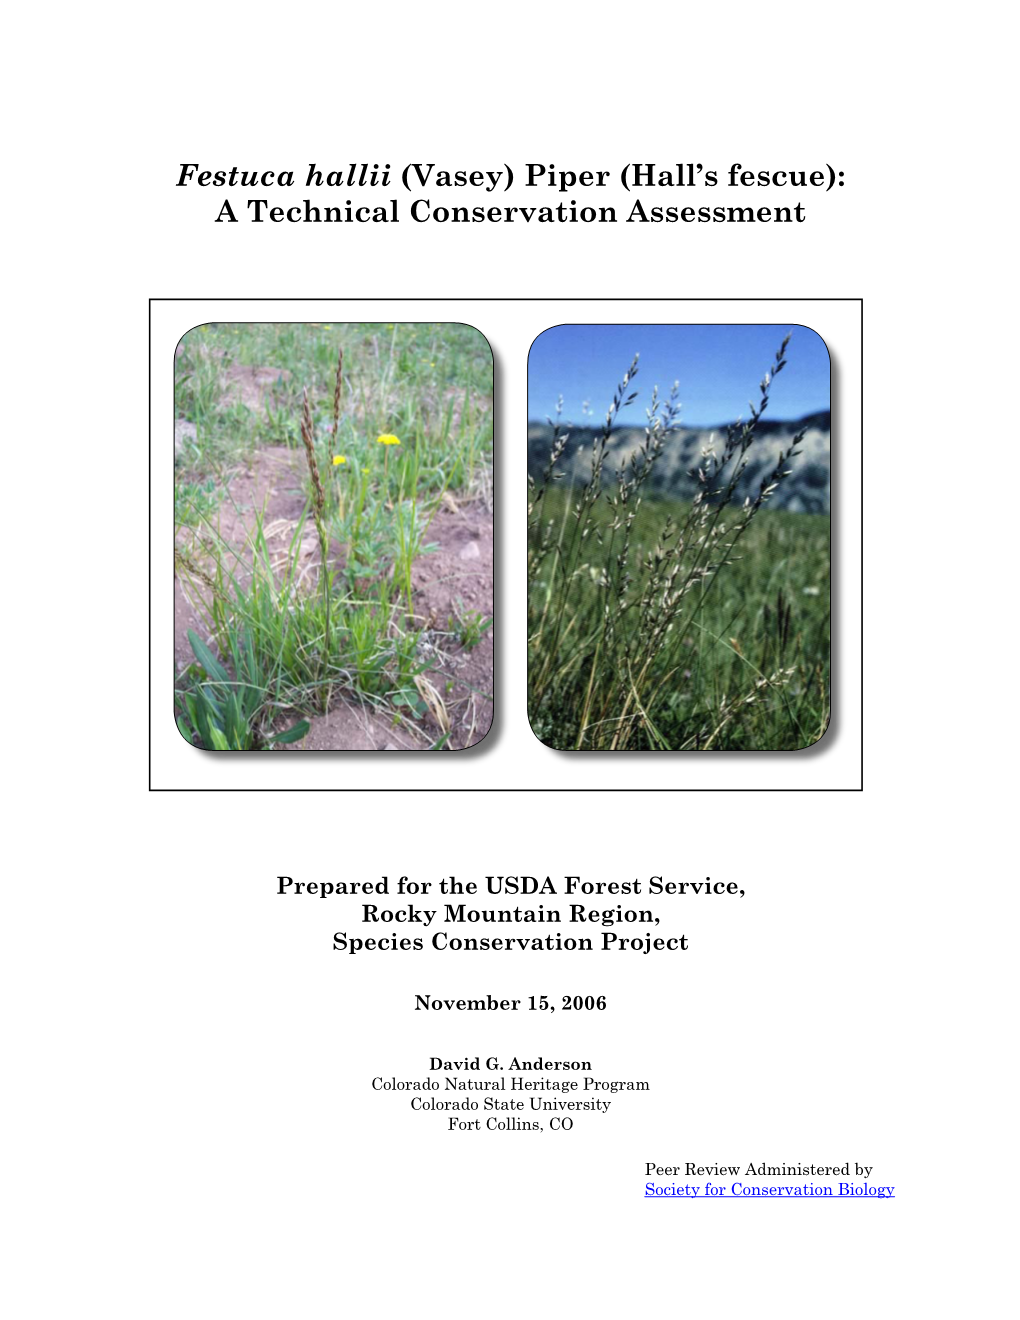 Festuca Hallii (Vasey) Piper (Hall’S Fescue): a Technical Conservation Assessment